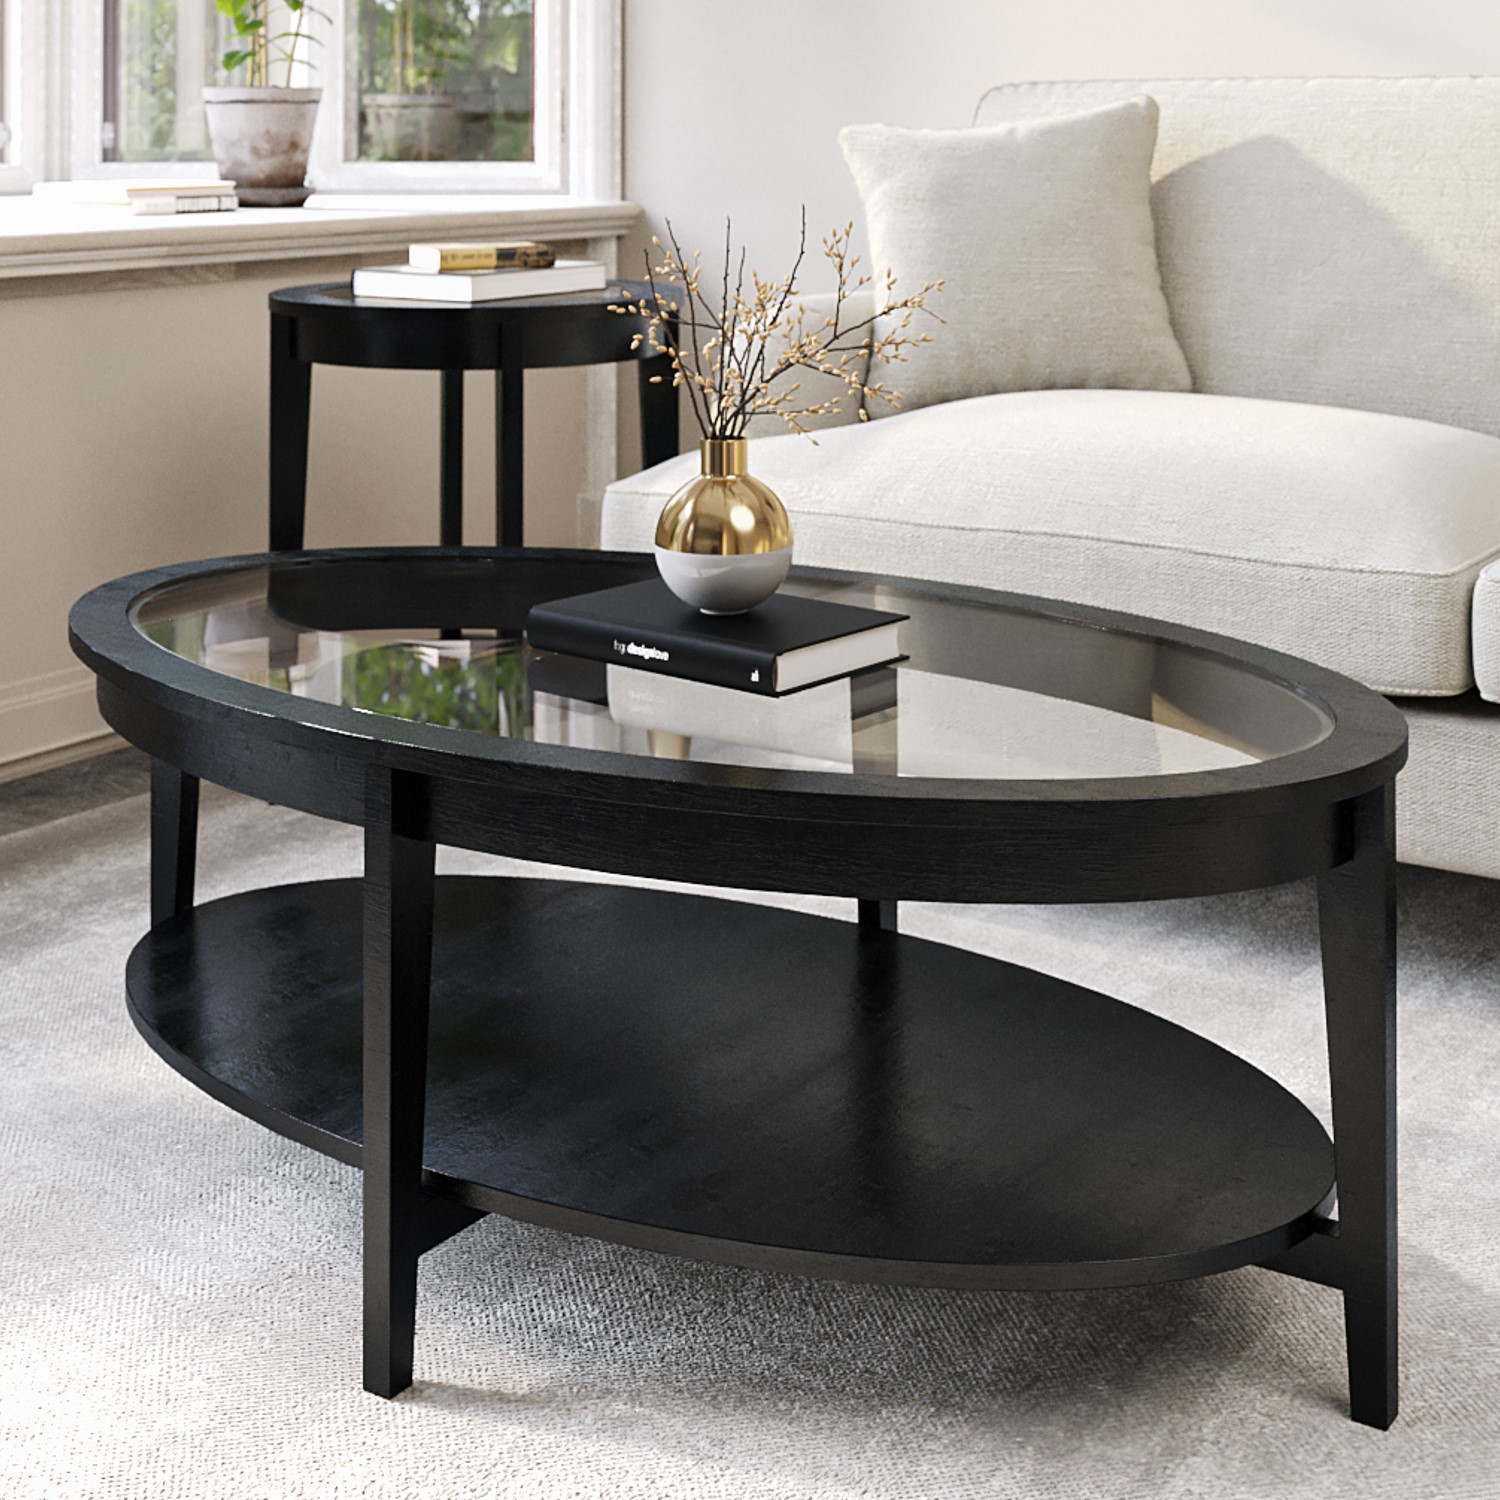 Photo of Large oval black wood coffee table with glass top - toula